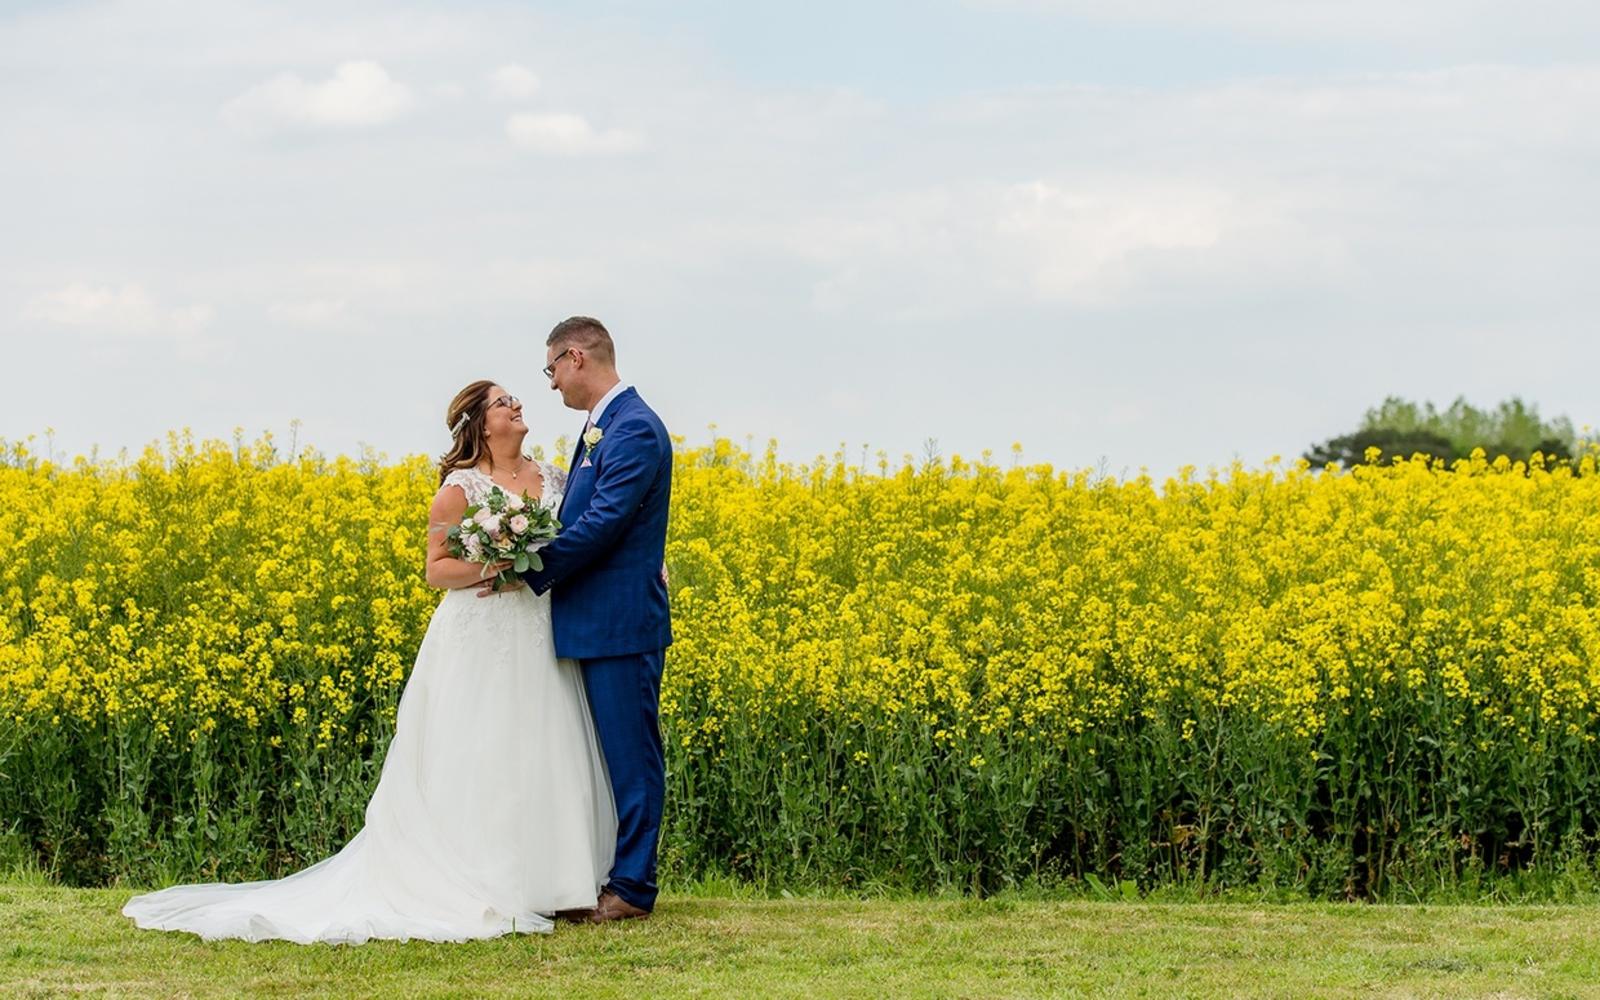 Capture Every Moment wedding photography duo from Cirencester reportage and traditional photographers Lapstone Barn Chipping Campden Cotswolds venue rapeseed 